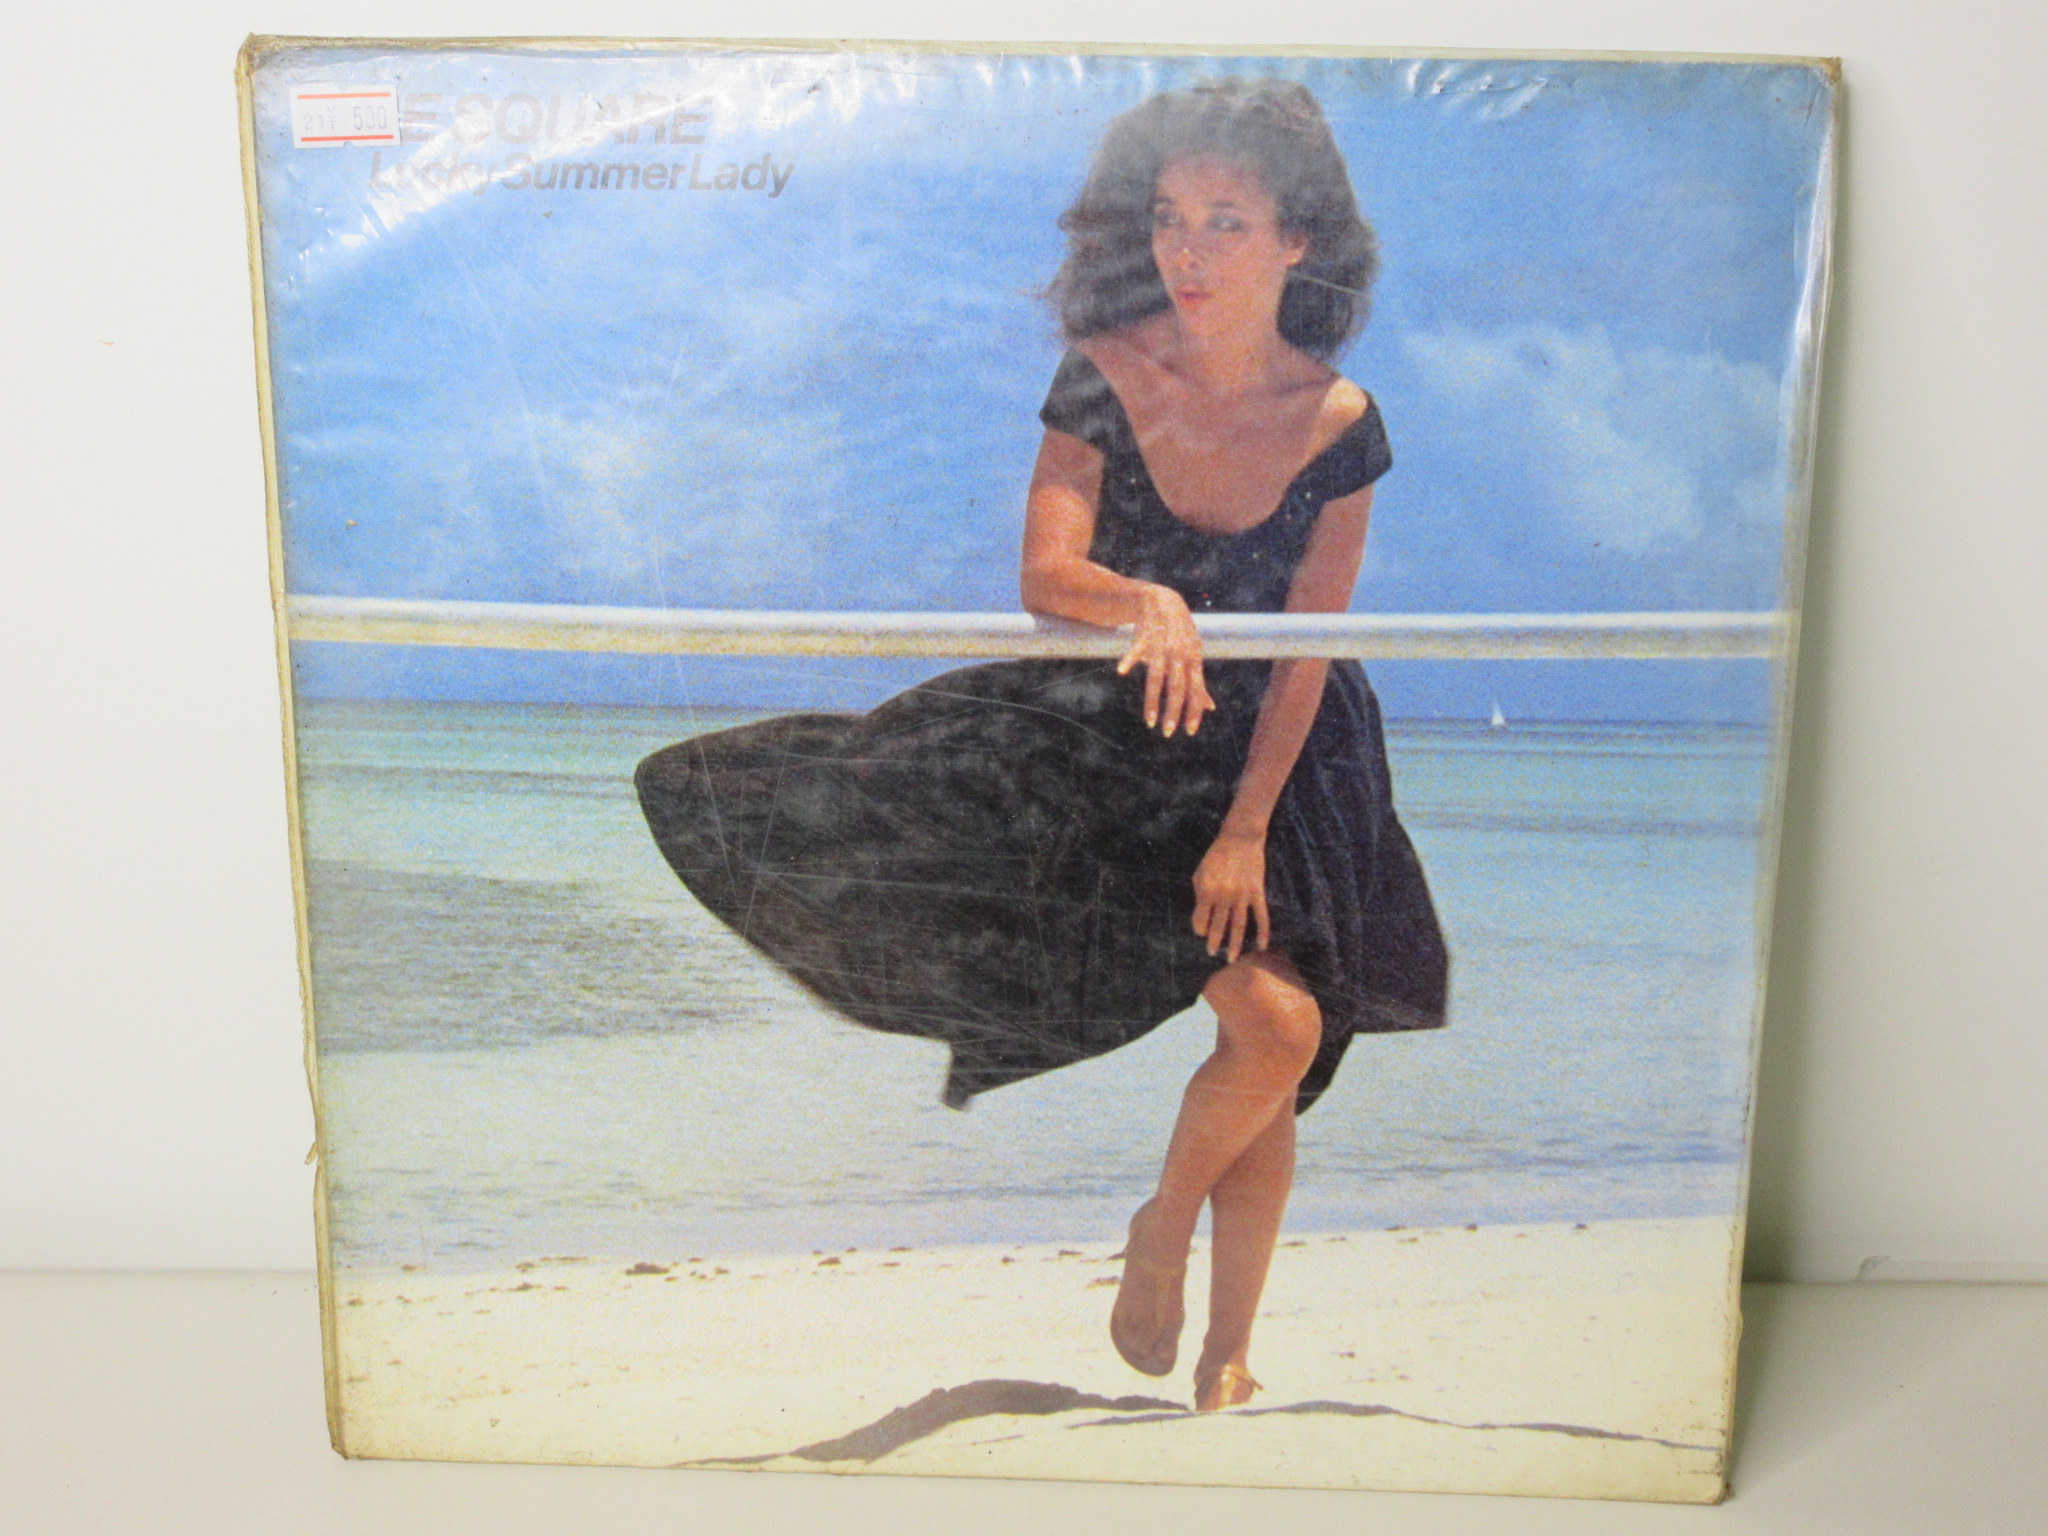 The Square - Lucky Summer Lady　25AP 1117